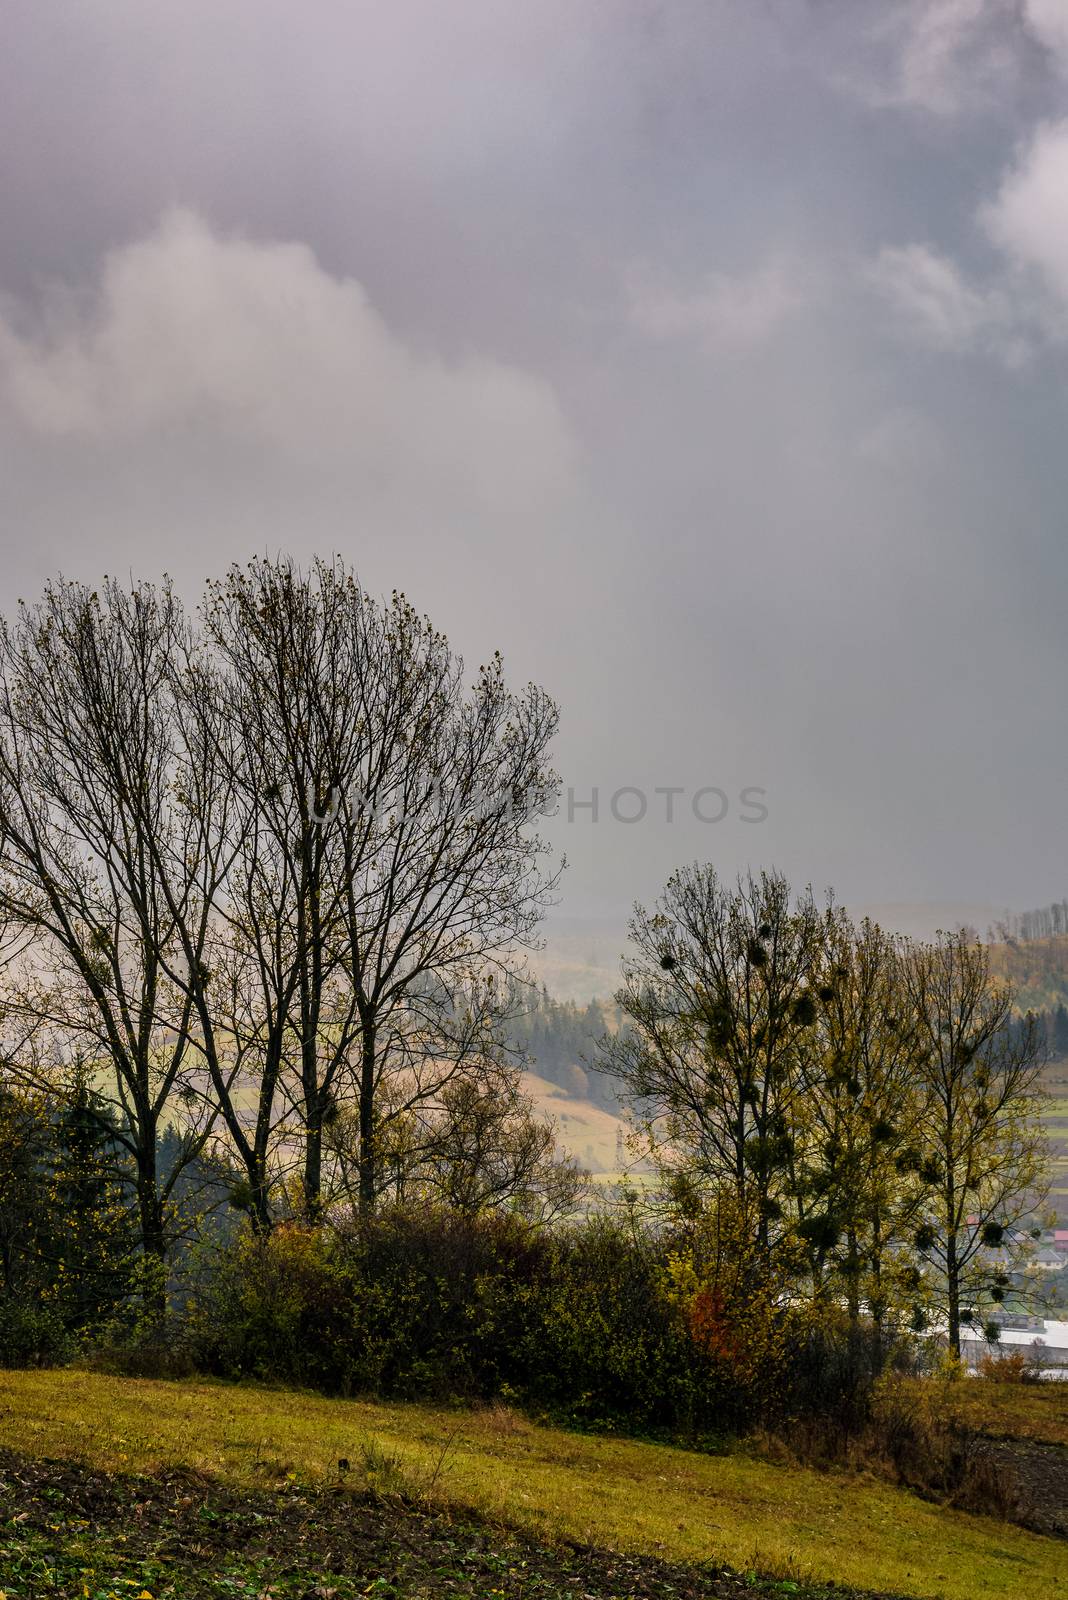 trees on hillside in rainy weather by Pellinni